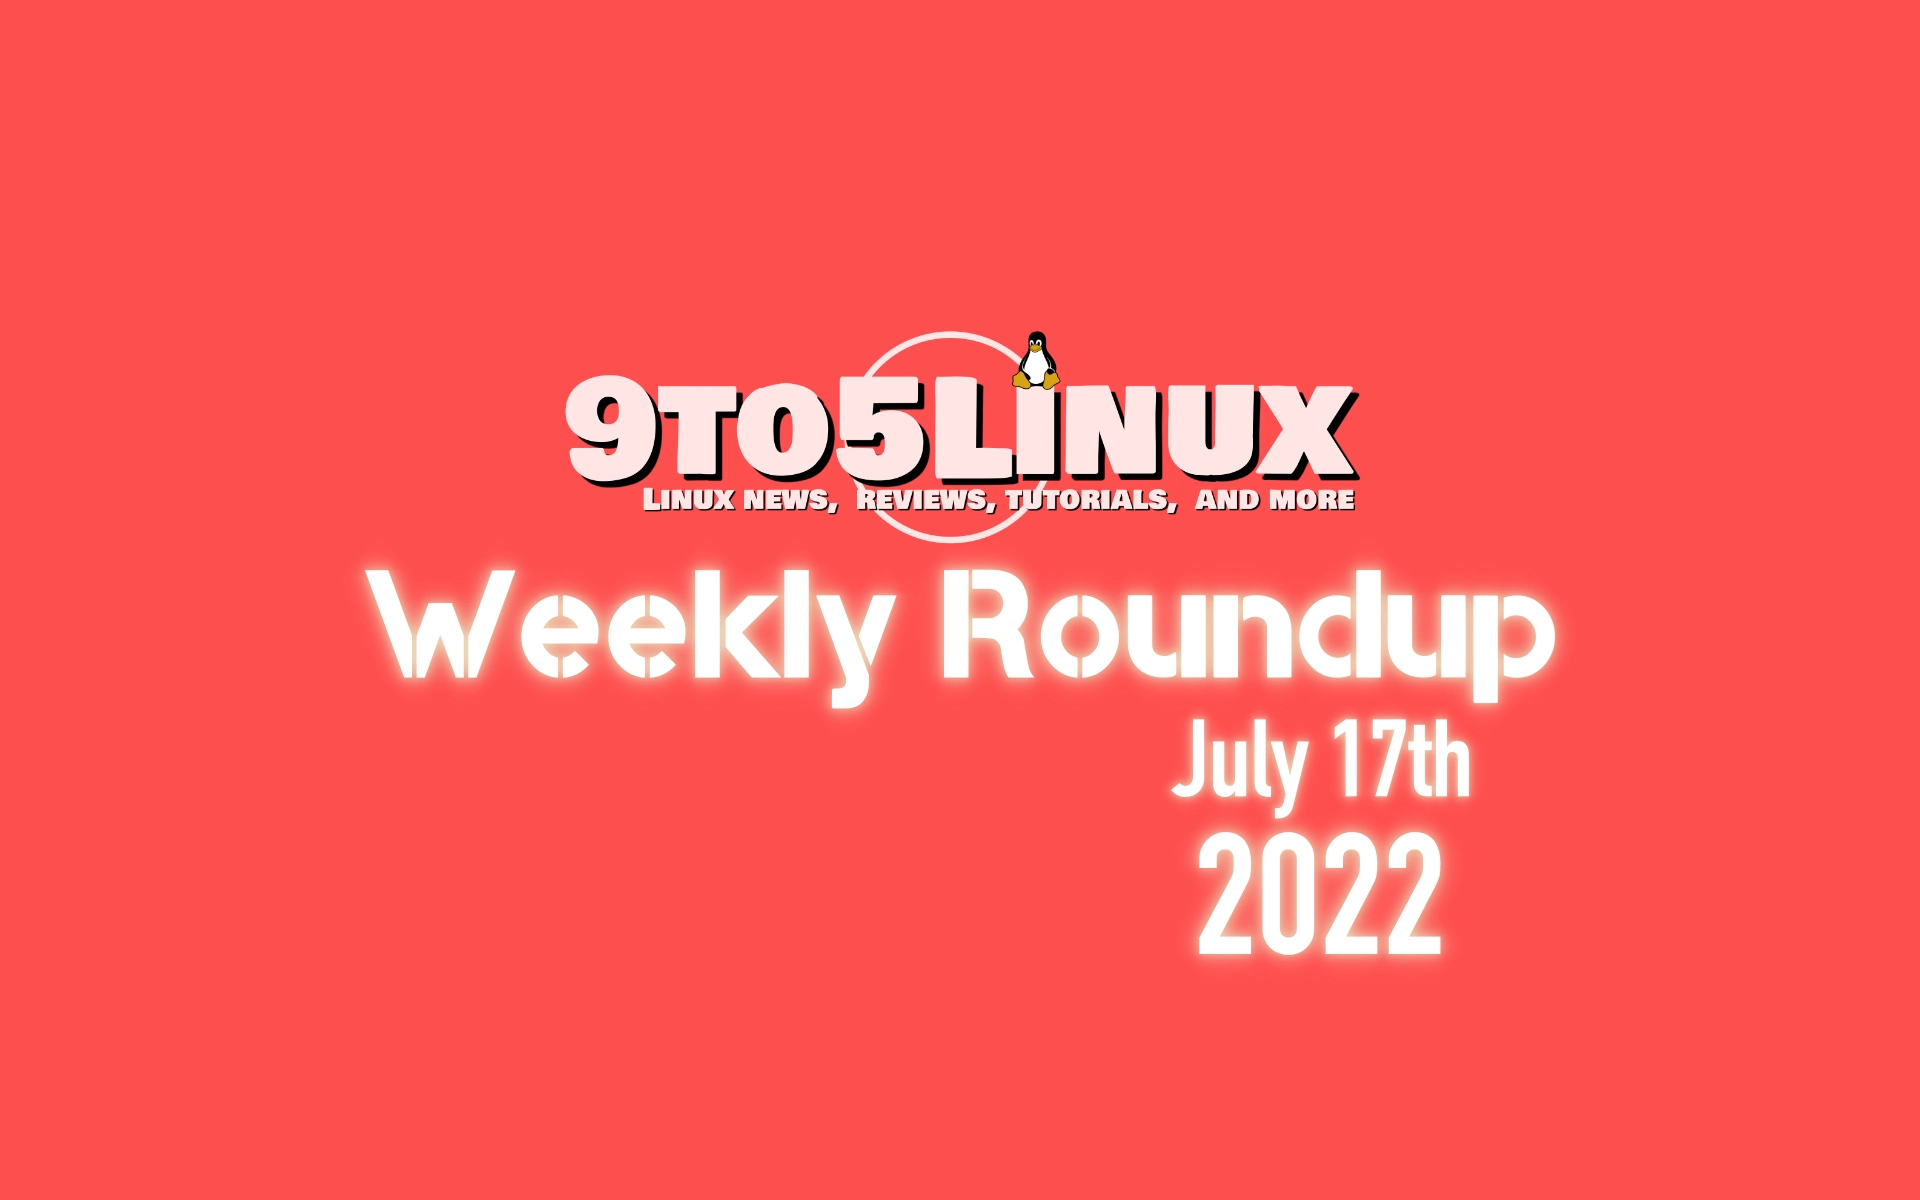 9to5Linux Weekly Roundup: July 17th, 2022